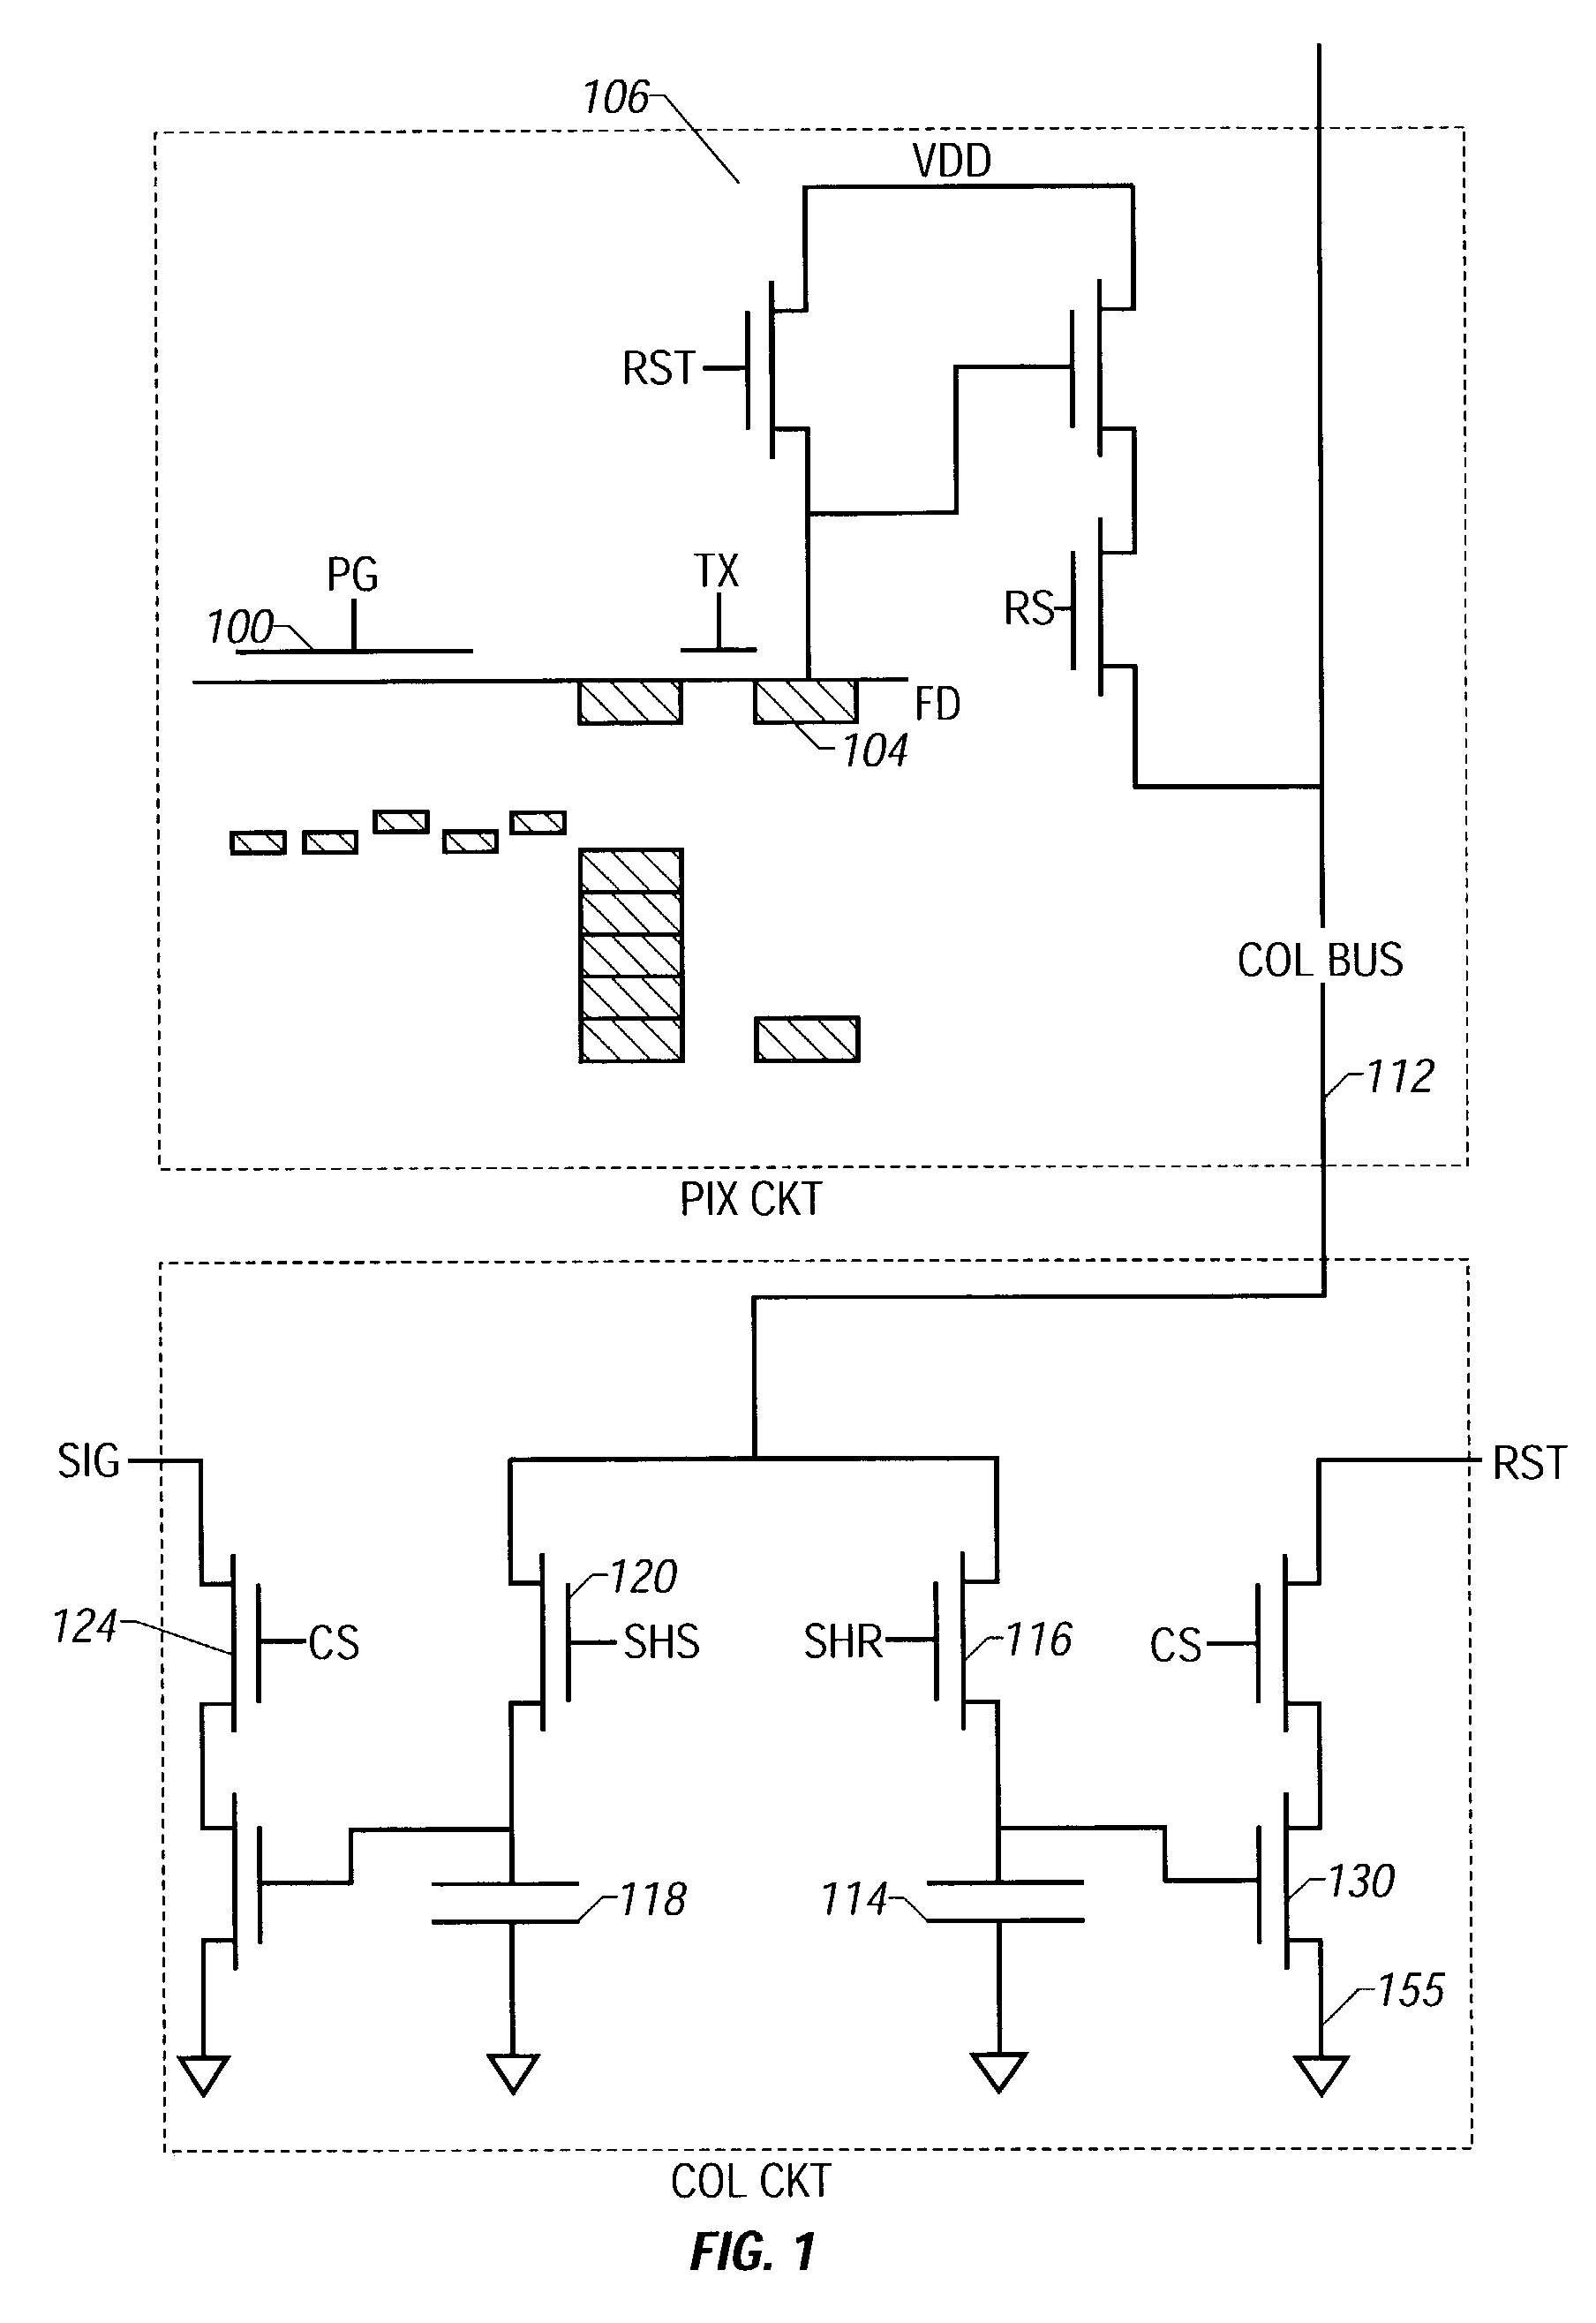 Single substrate camera device with CMOS image sensor